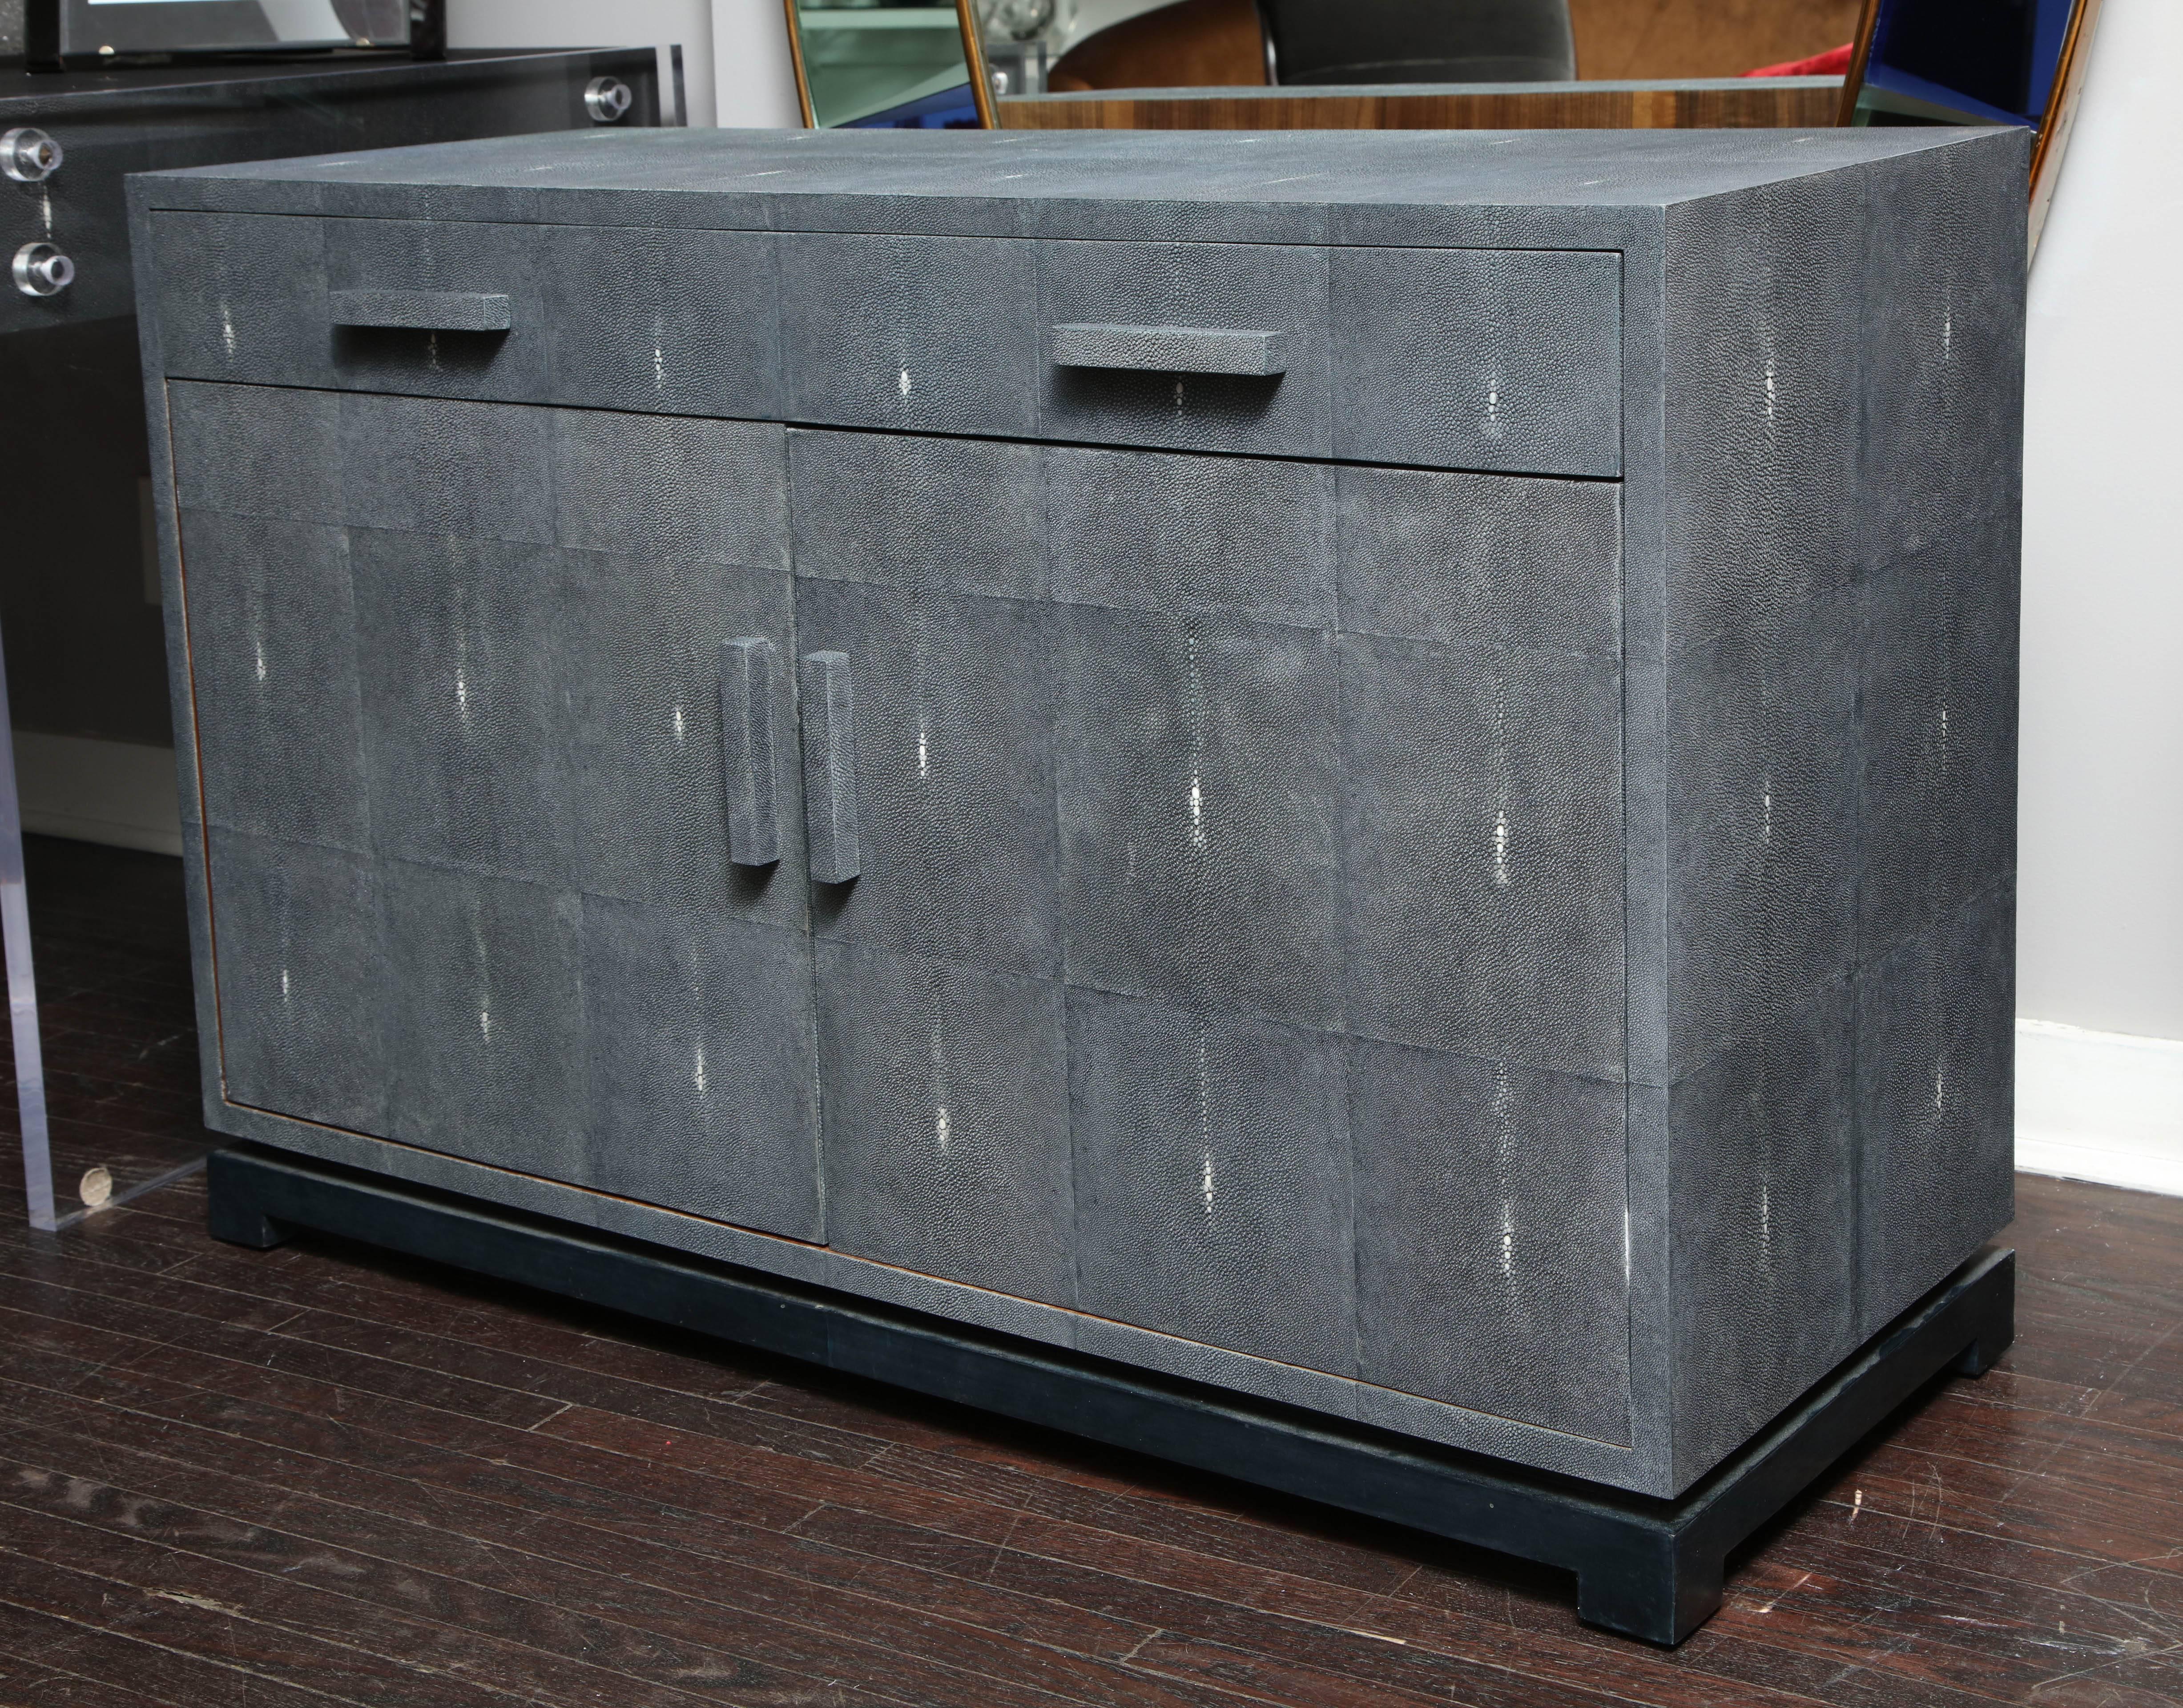 This is a floor model shagreen sideboard available for immediate purchase. The piece was handmade with genuine shagreen dyed in gray color. Each shagreen skin shows slight tone variations of gray and spine dots that are only unique to genuine